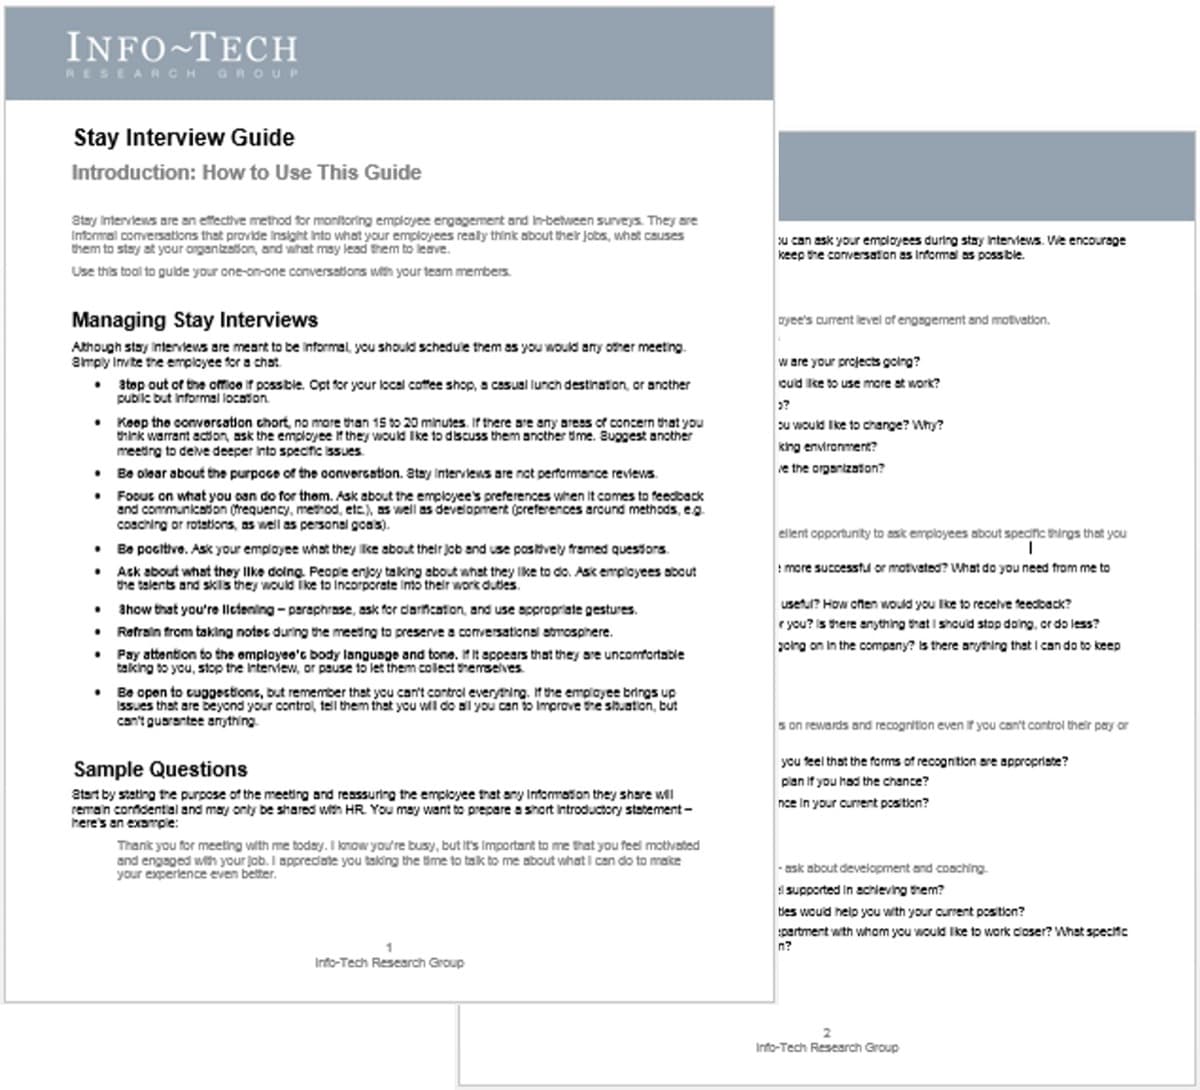 The image contains a screenshot of Info-Tech's Stay Interview Guide.